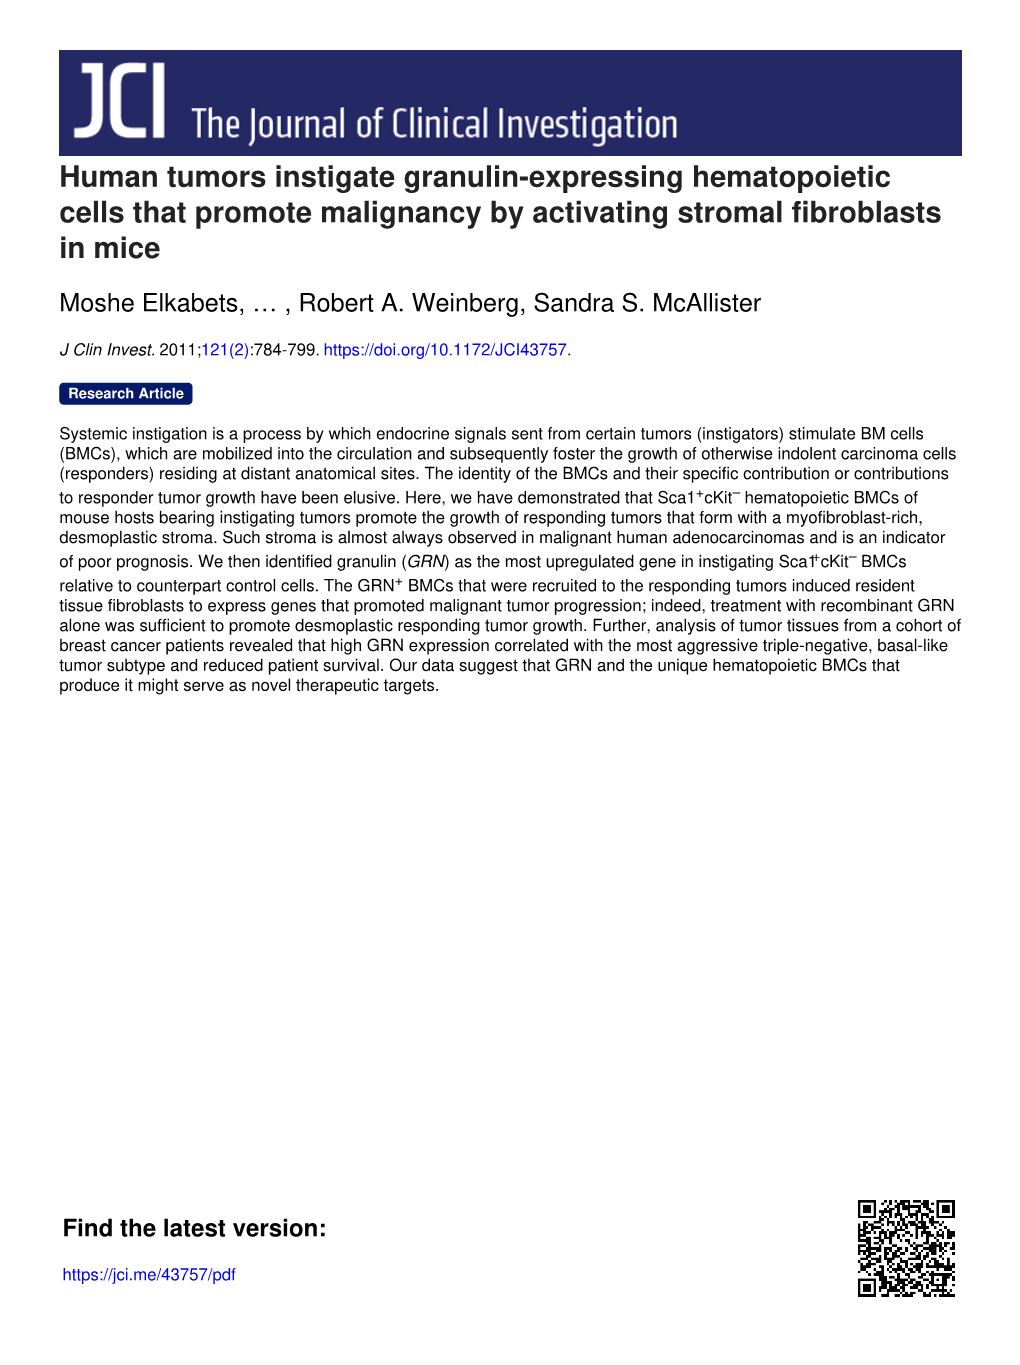 Human Tumors Instigate Granulin-Expressing Hematopoietic Cells That Promote Malignancy by Activating Stromal Fibroblasts in Mice